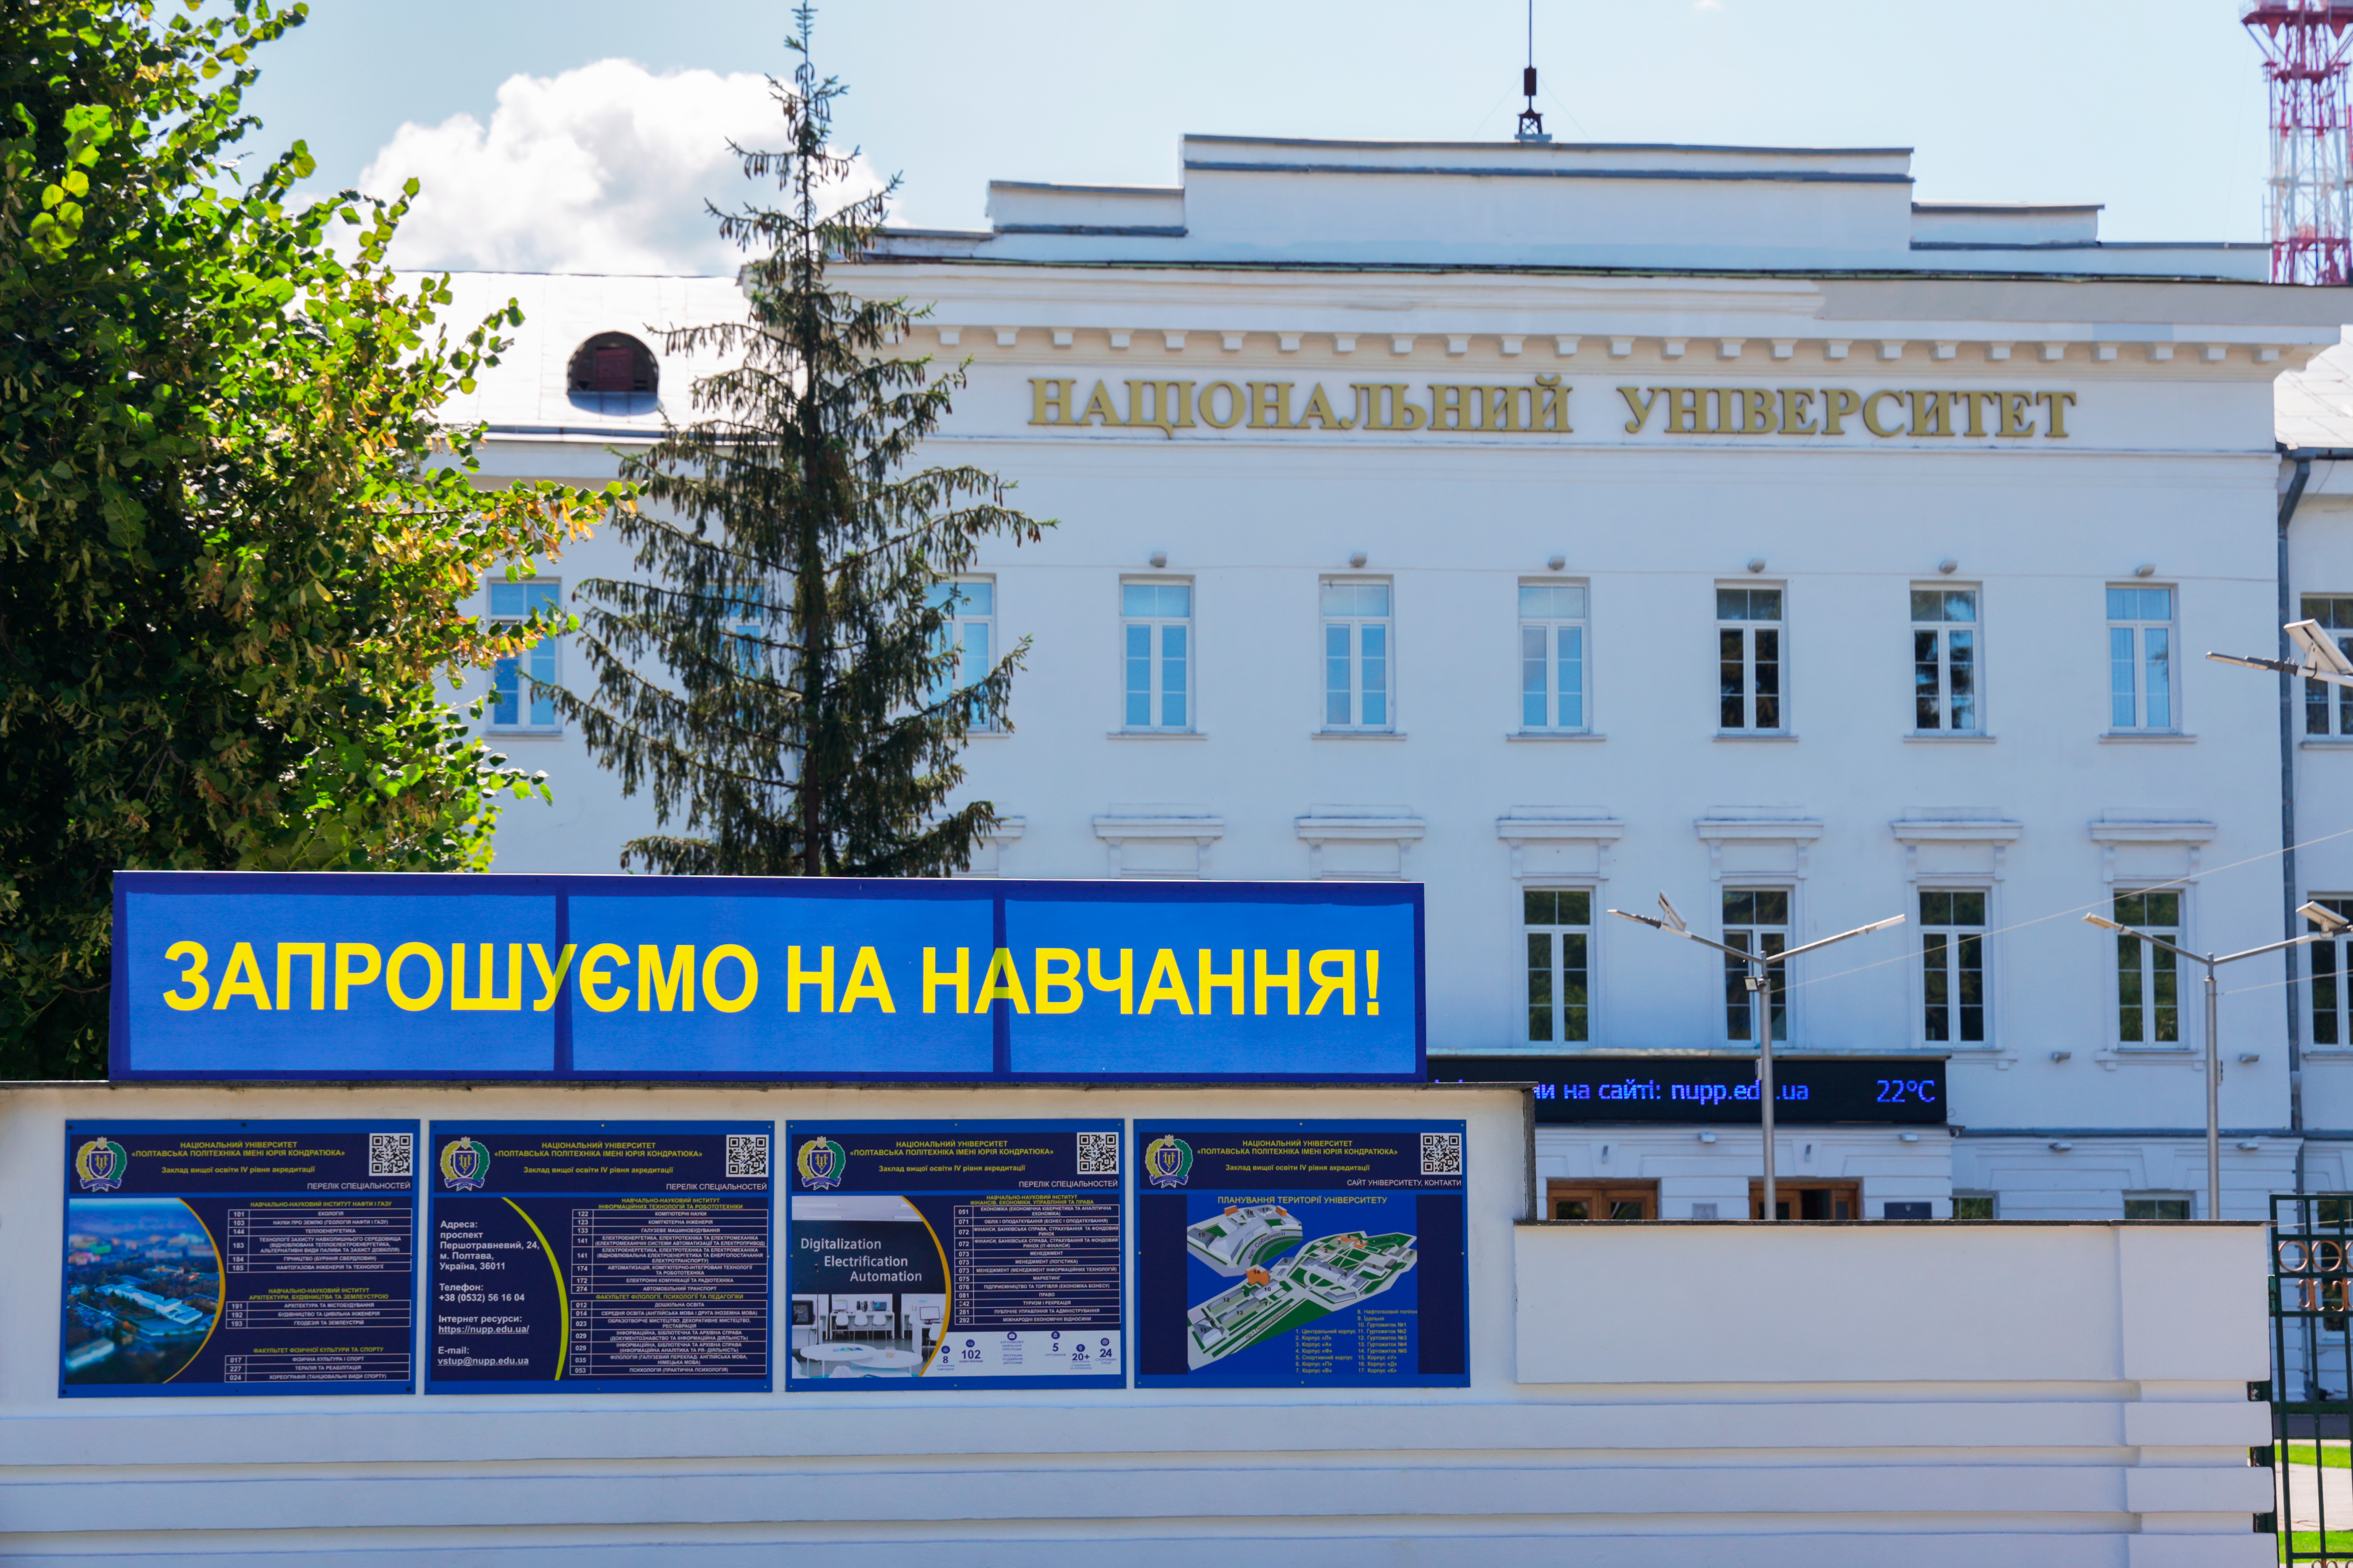 Poltava Polytechnic receives the largest volume of state orders in the region!